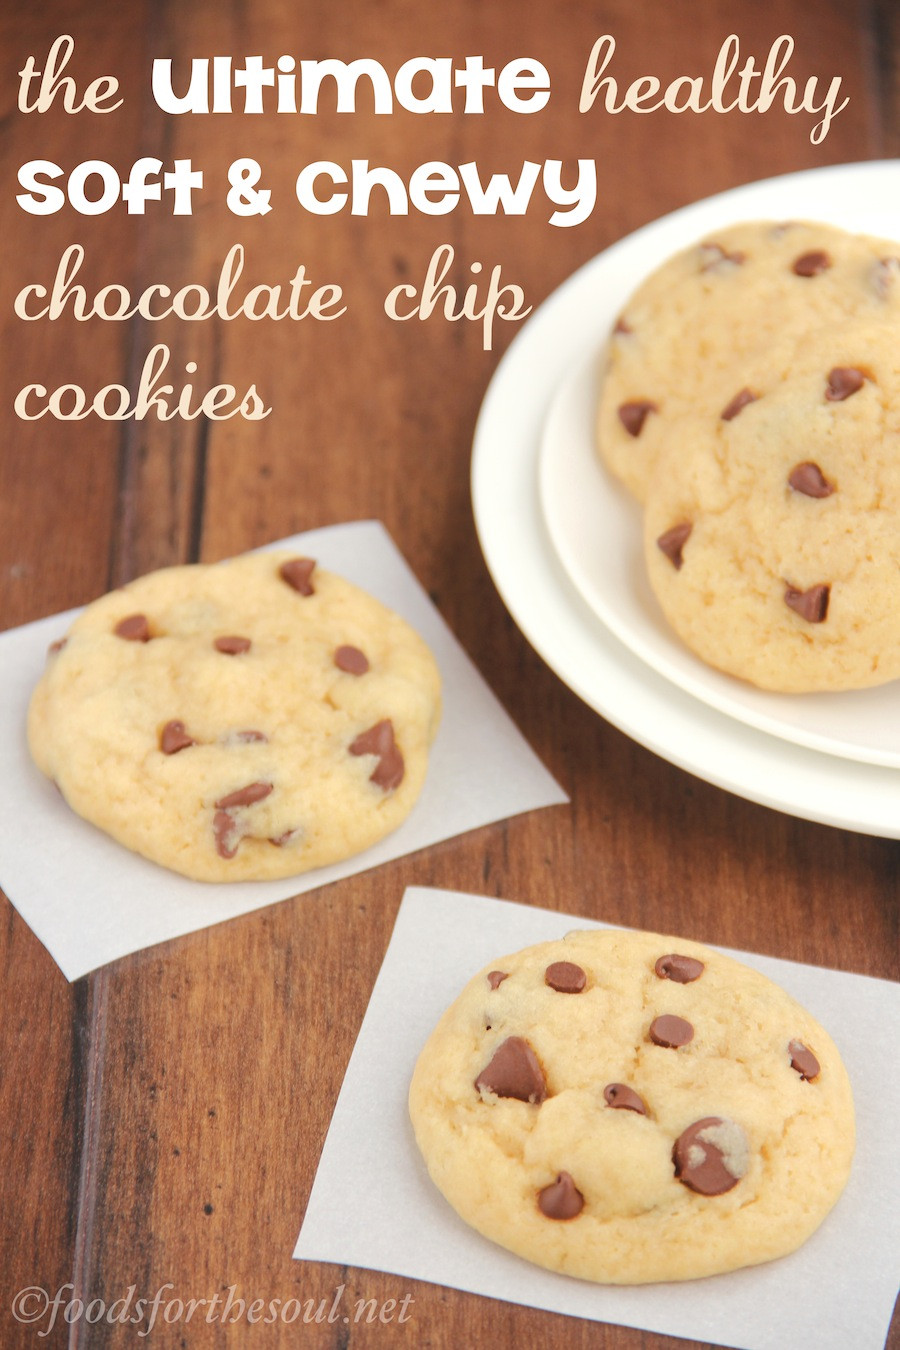 Low Calorie Chocolate Chip Cookies
 The Ultimate Healthy Soft & Chewy Chocolate Chip Cookies